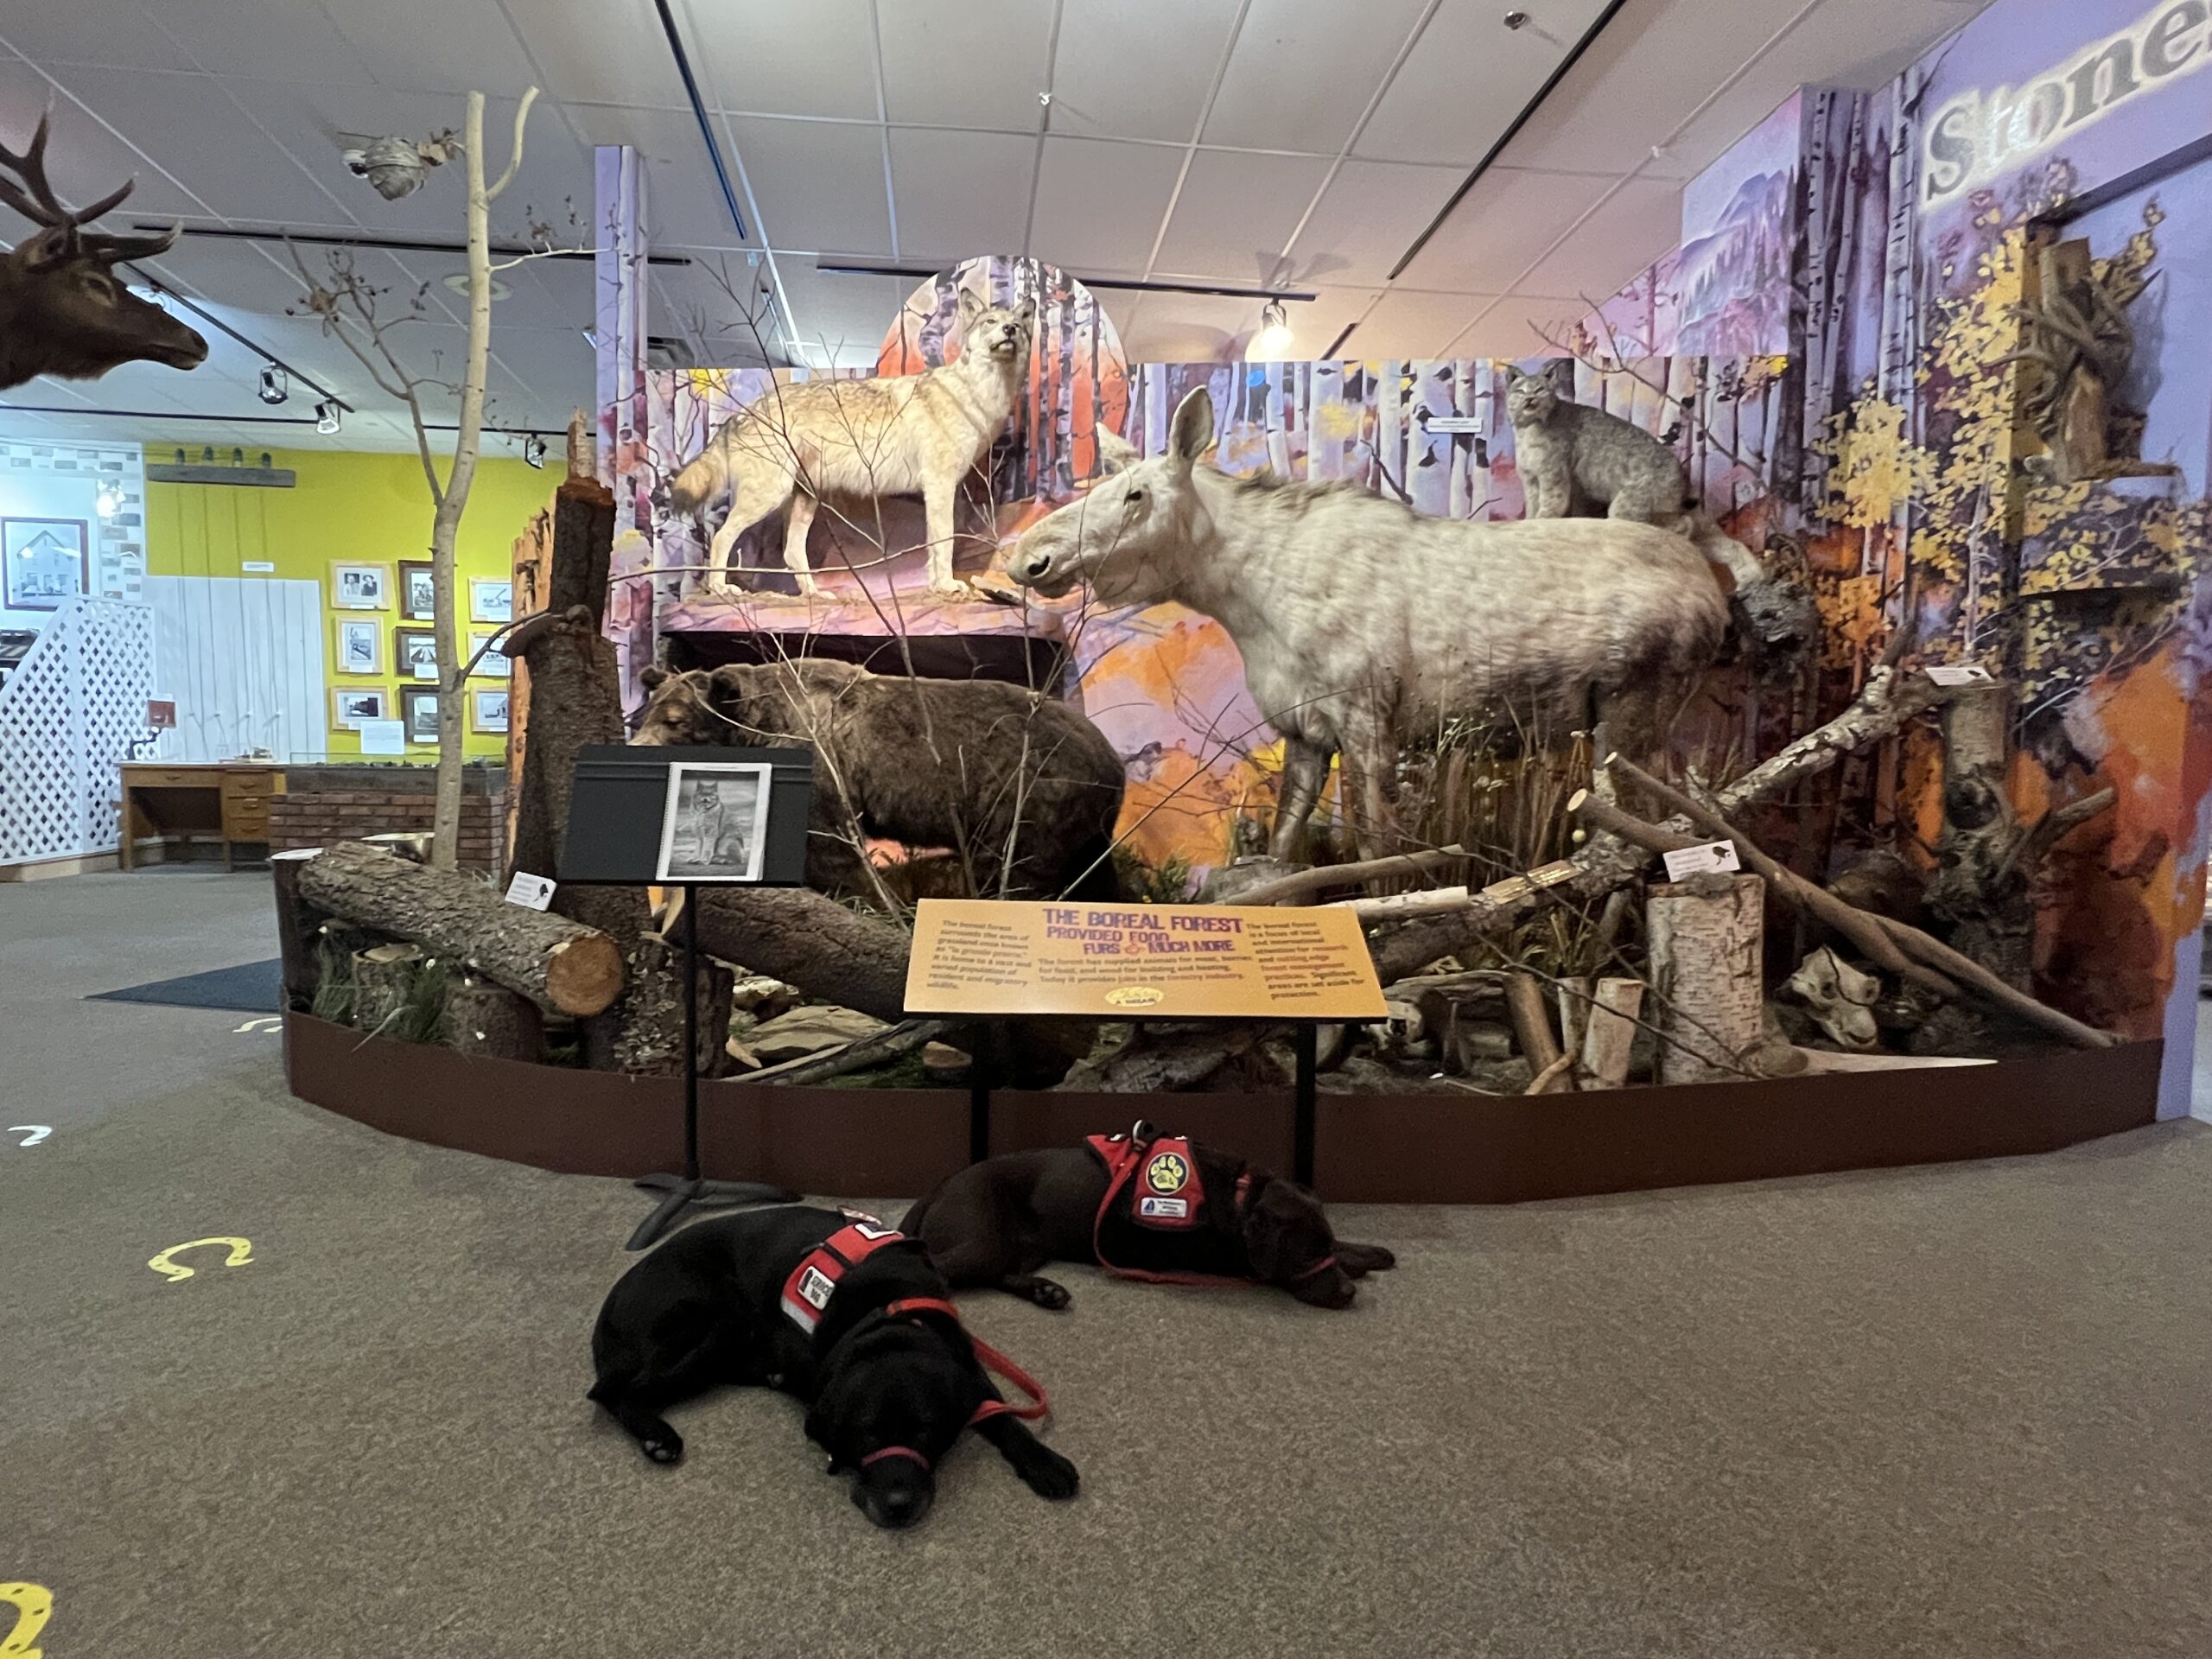 Saint and Dusty Relax by a Display of Wild Animals Found in Alberta at the Grande Prairie Museum, Muskoseepi Park, Grande Prairie, Alberta--8.6.2022